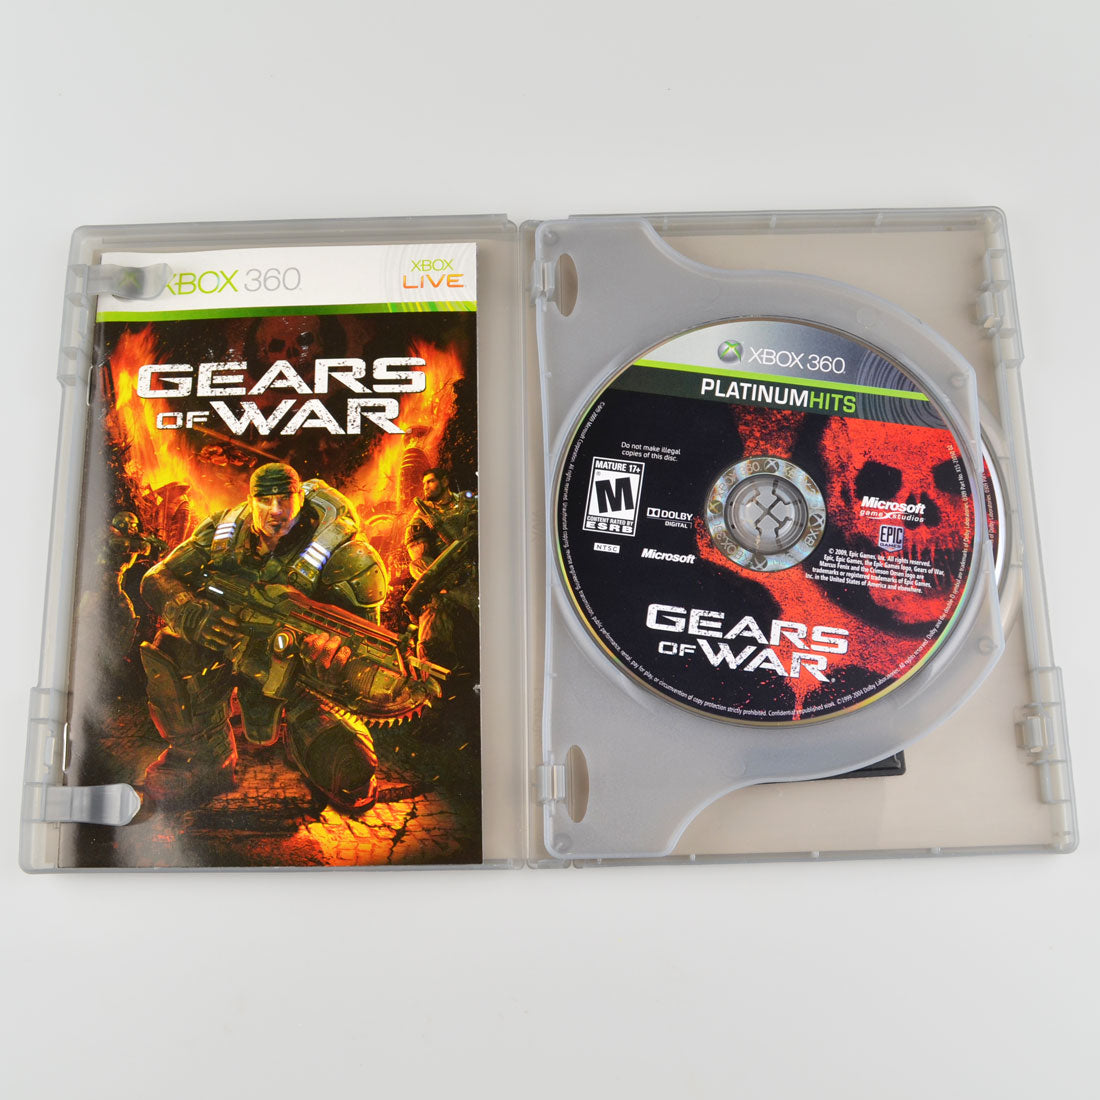 NEW Gears of War 2 The Complete Collection (XBox 360 Platinum Hits)